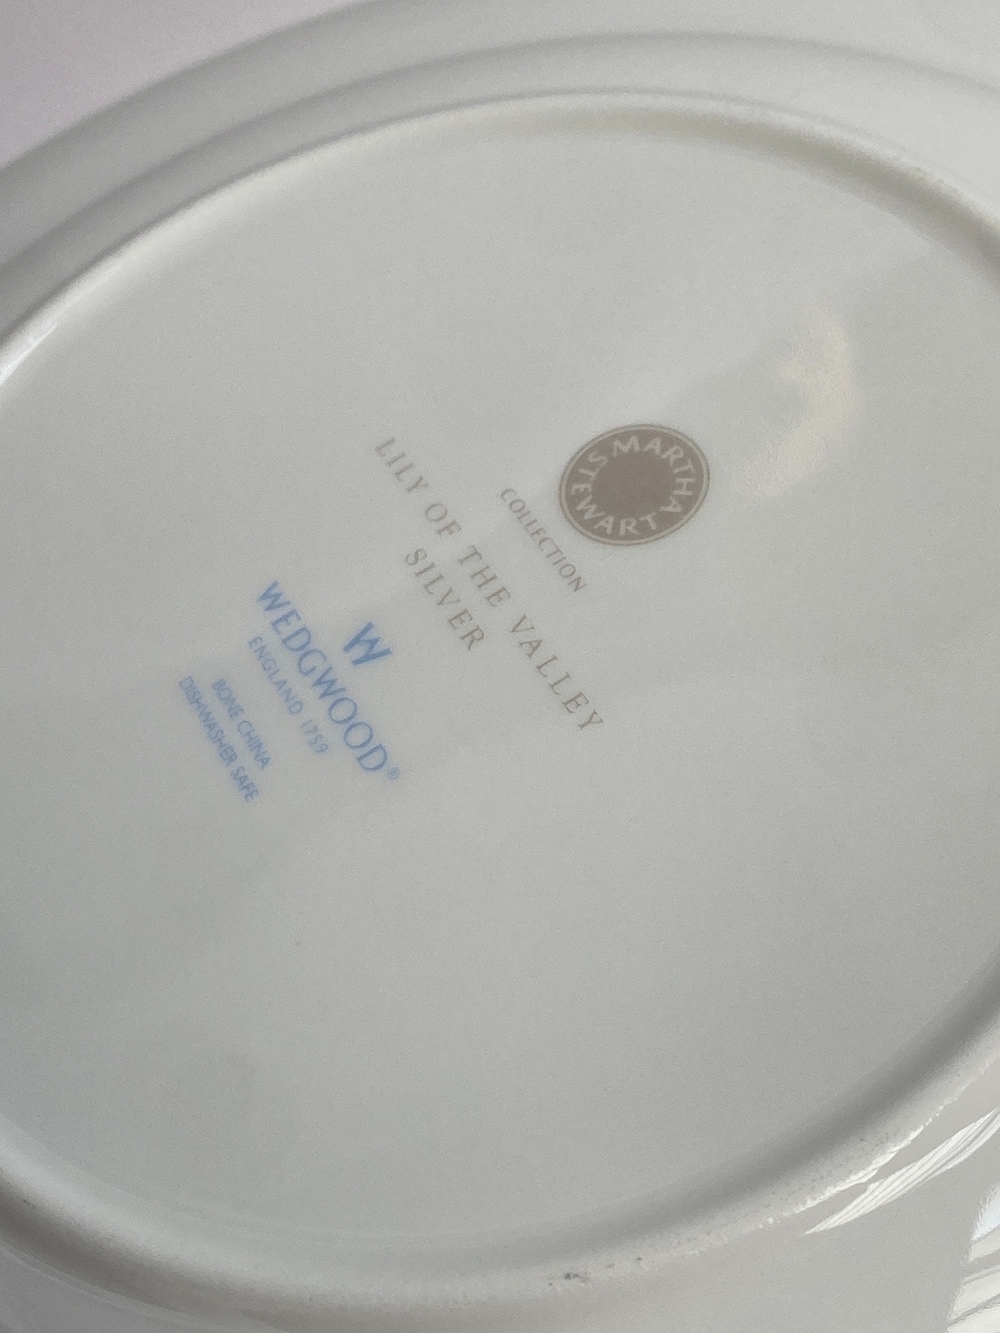 Wedgwood Martha Stewart 'Lily of the Valley' silver, soup dishes and dinner plates - Image 2 of 2